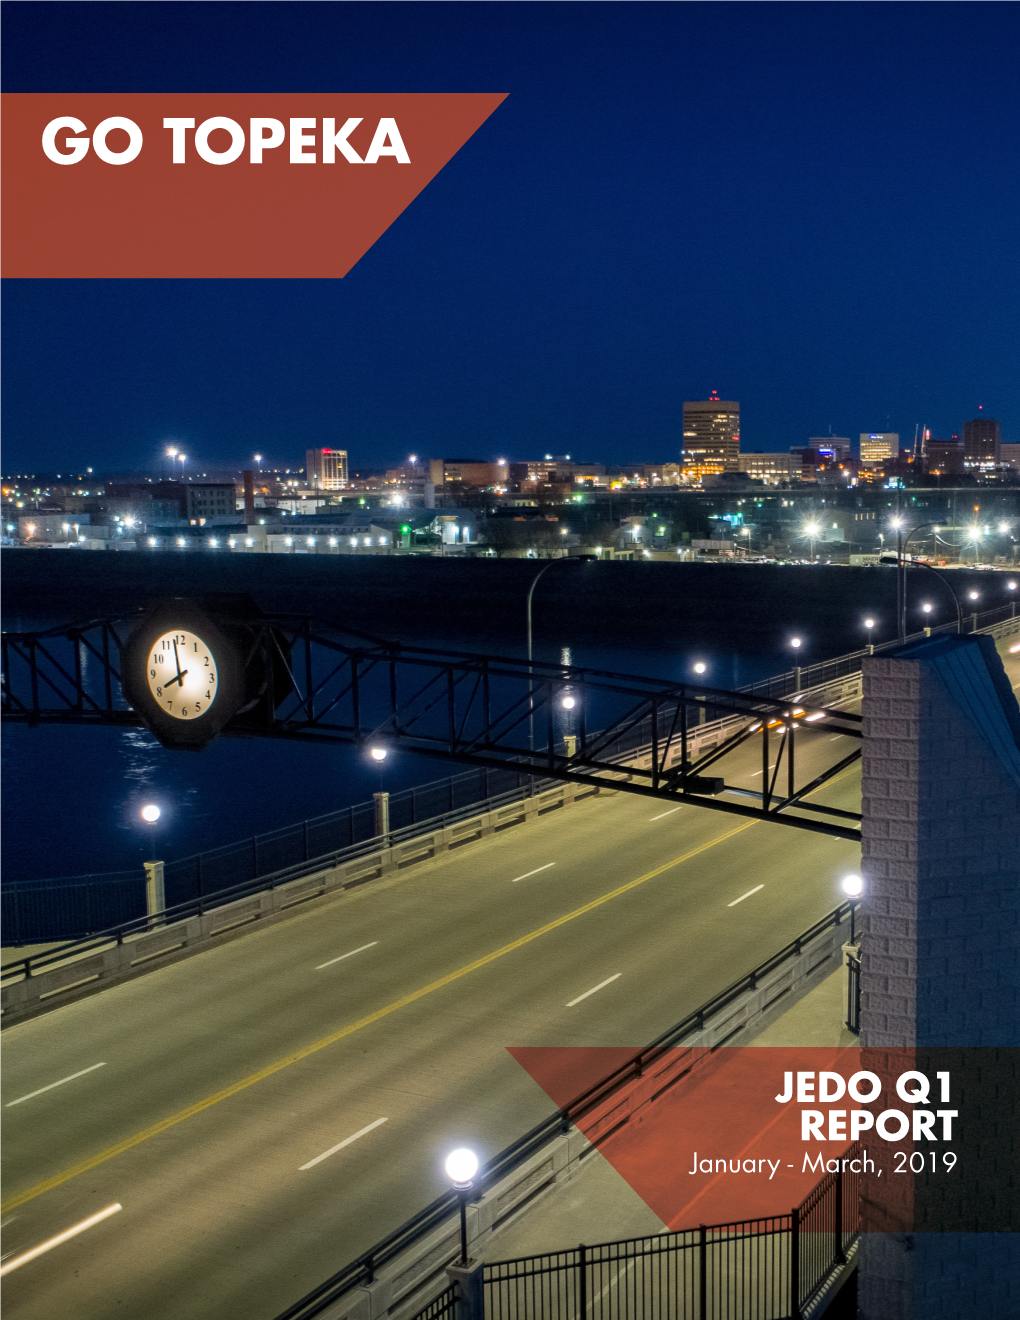 JEDO 2019January - March, 2019 First Quarter Report